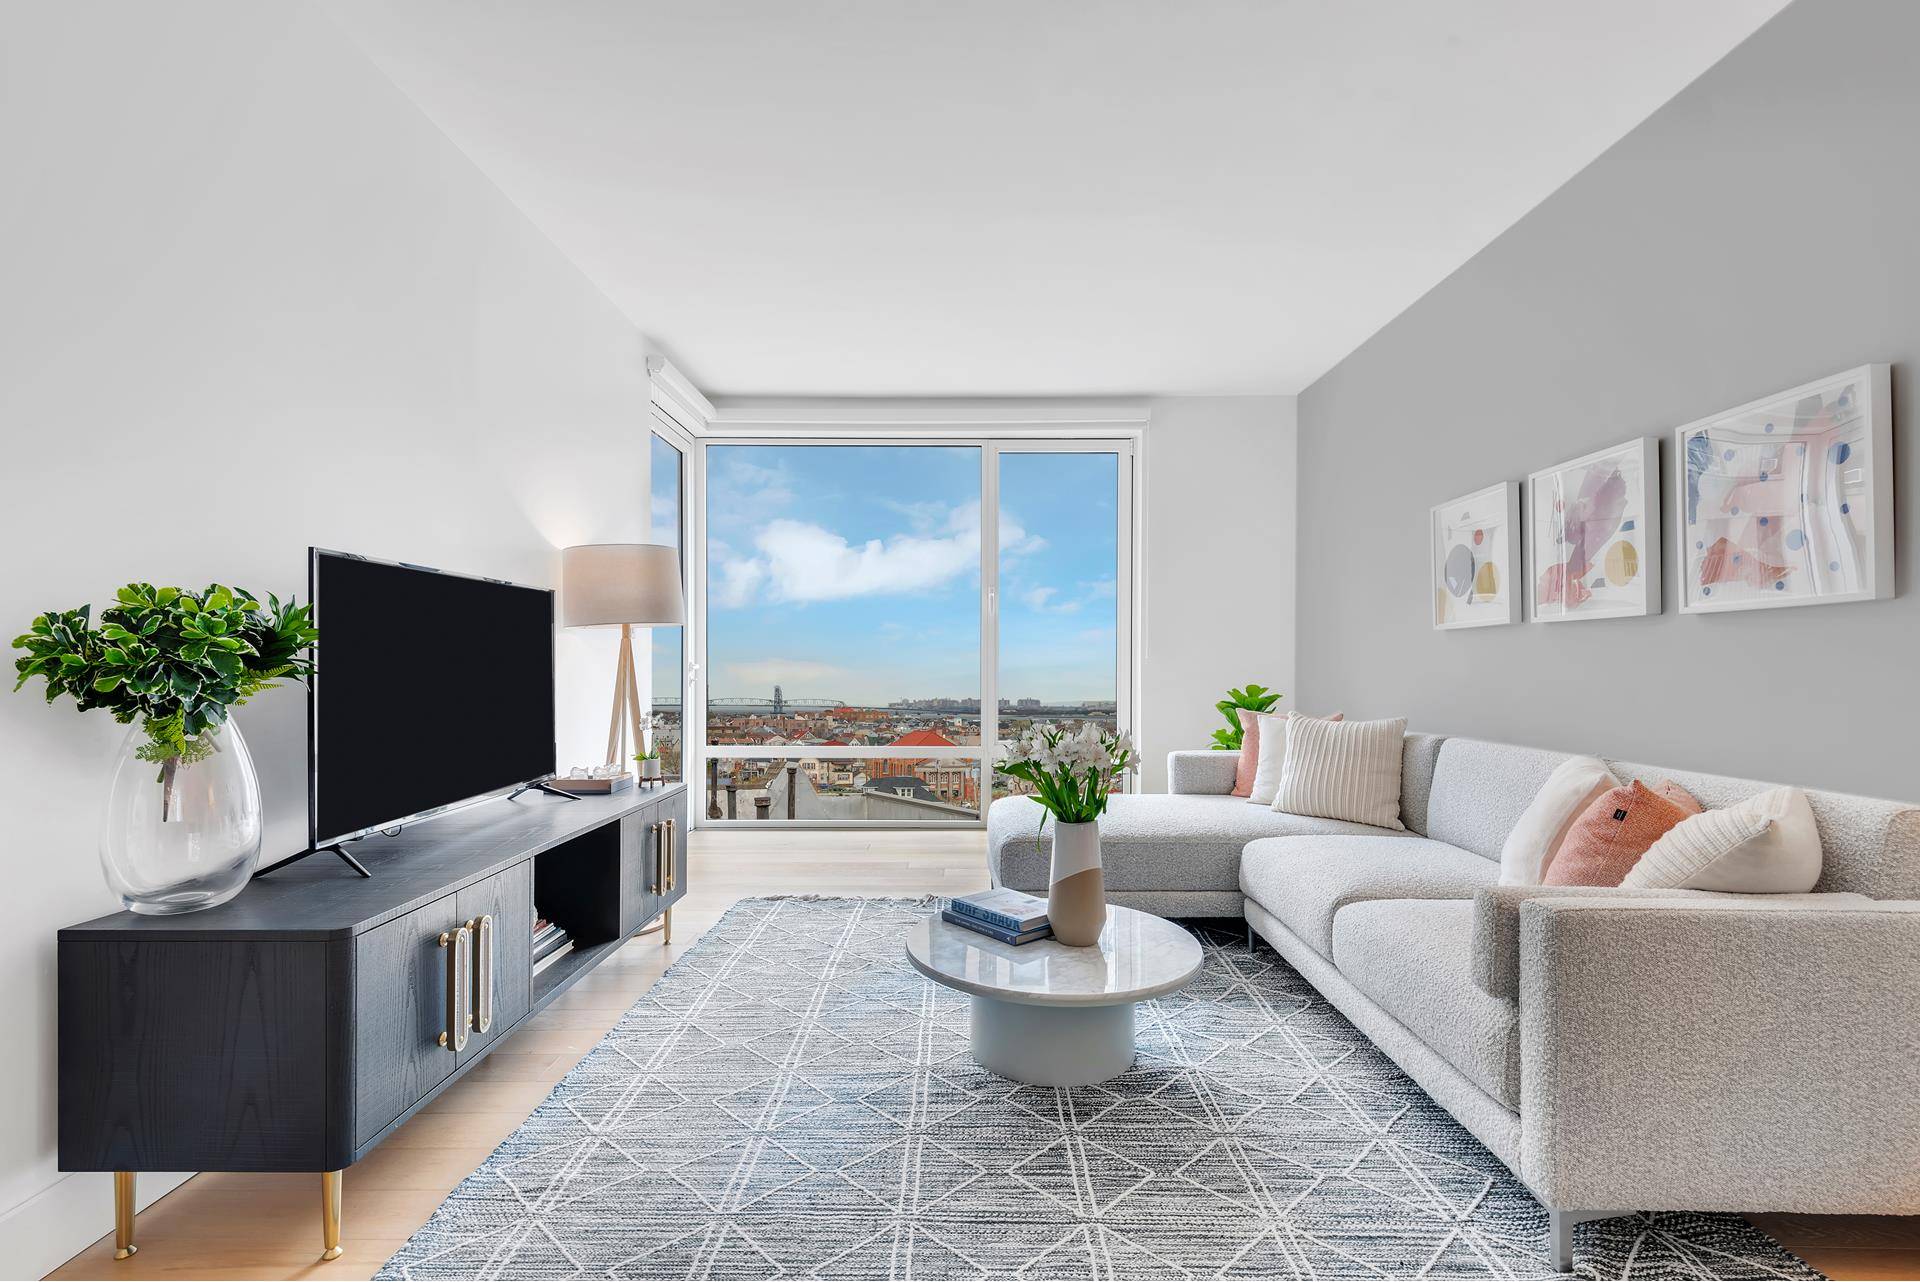 Immediate occupancy. This well designed 1, 127 square foot two bedroom, two bathroom residence features Western exposures and a 53 square foot exterior balcony.